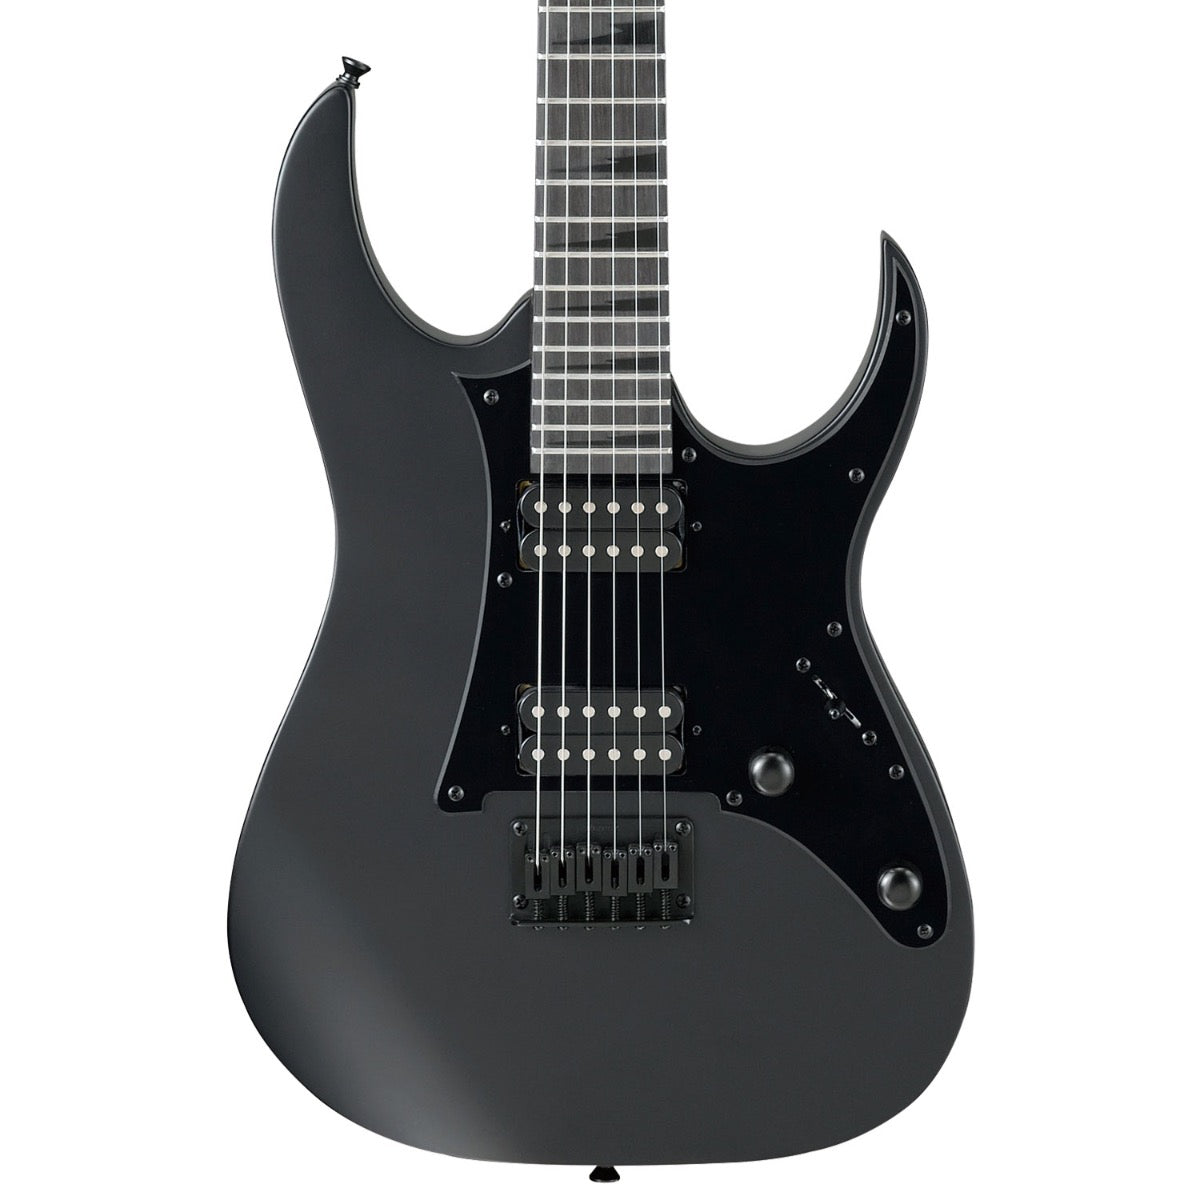 Close-up top view of Ibanez GRGR131EX GIO Electric Guitar - Black Flat showing body and portion of fingerboard